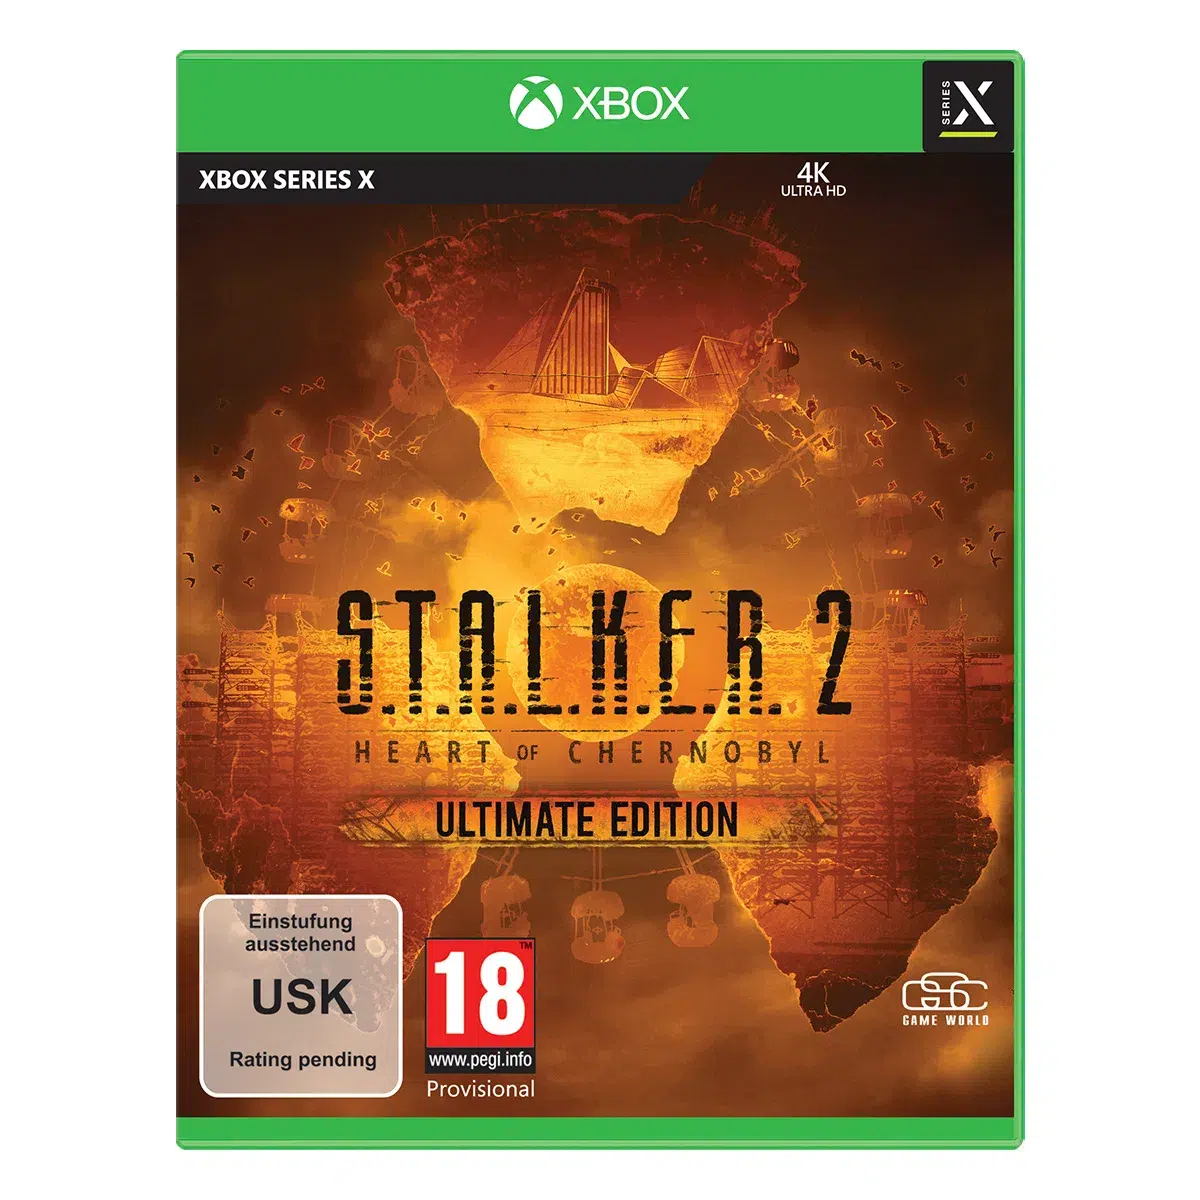 S.T.A.L.K.E.R. 2 Heart of Chornobyl Ultimate Edition (XSRX) (INT)